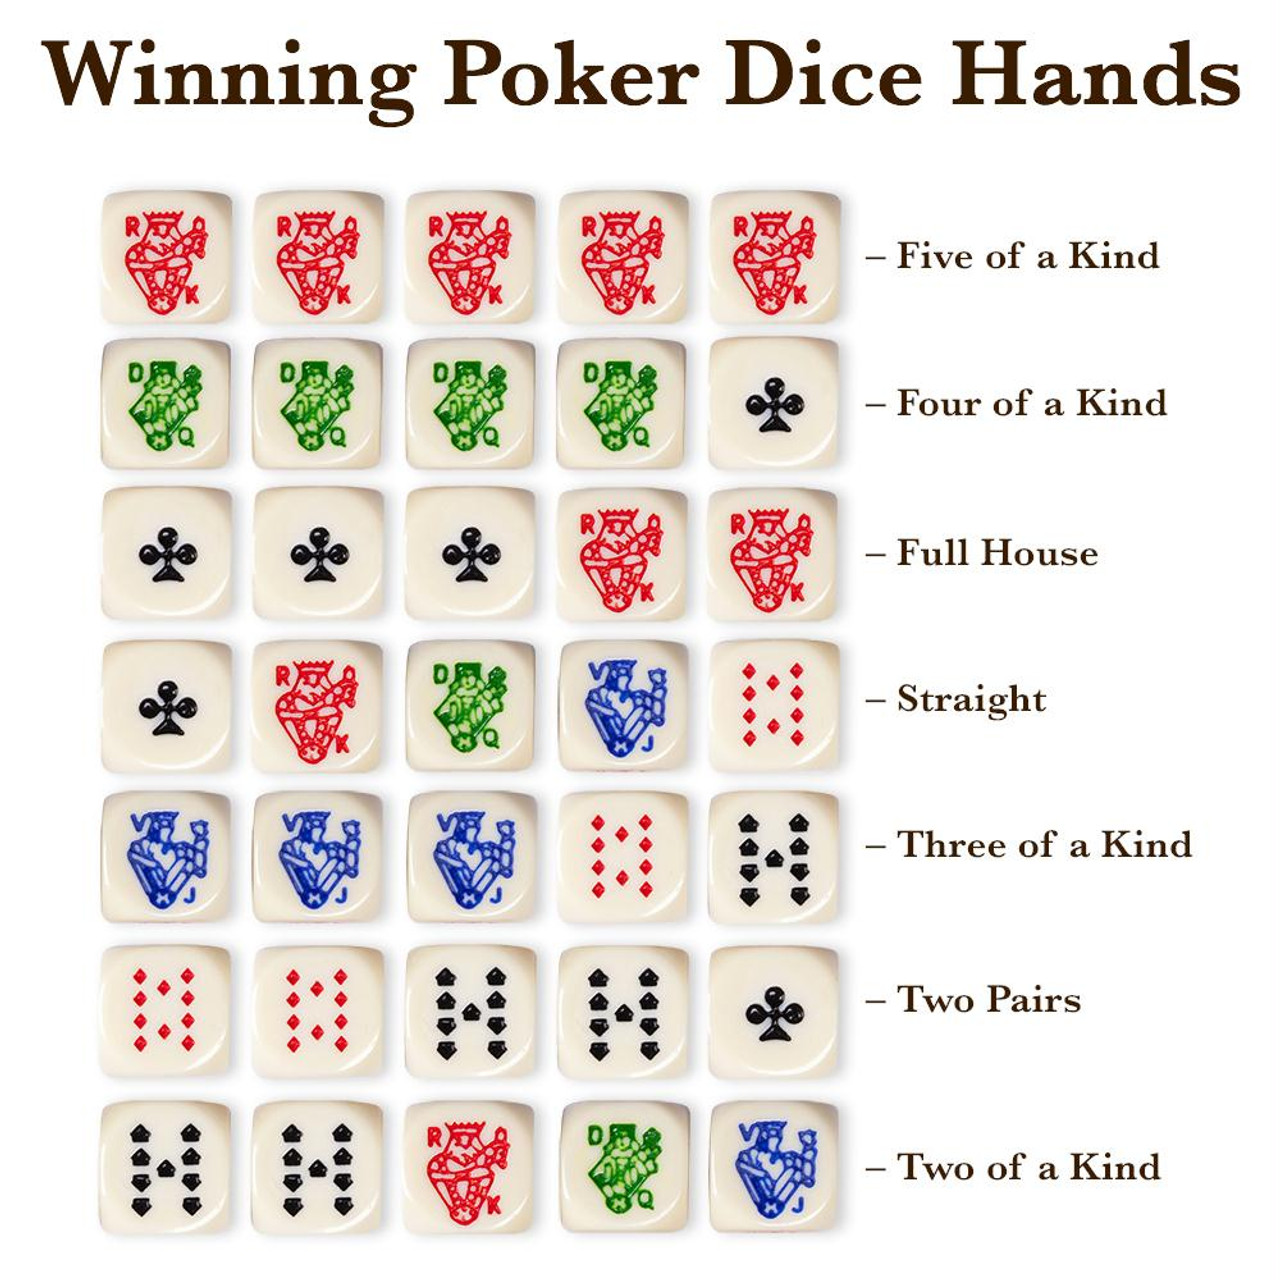 Rules Of Poker Dice